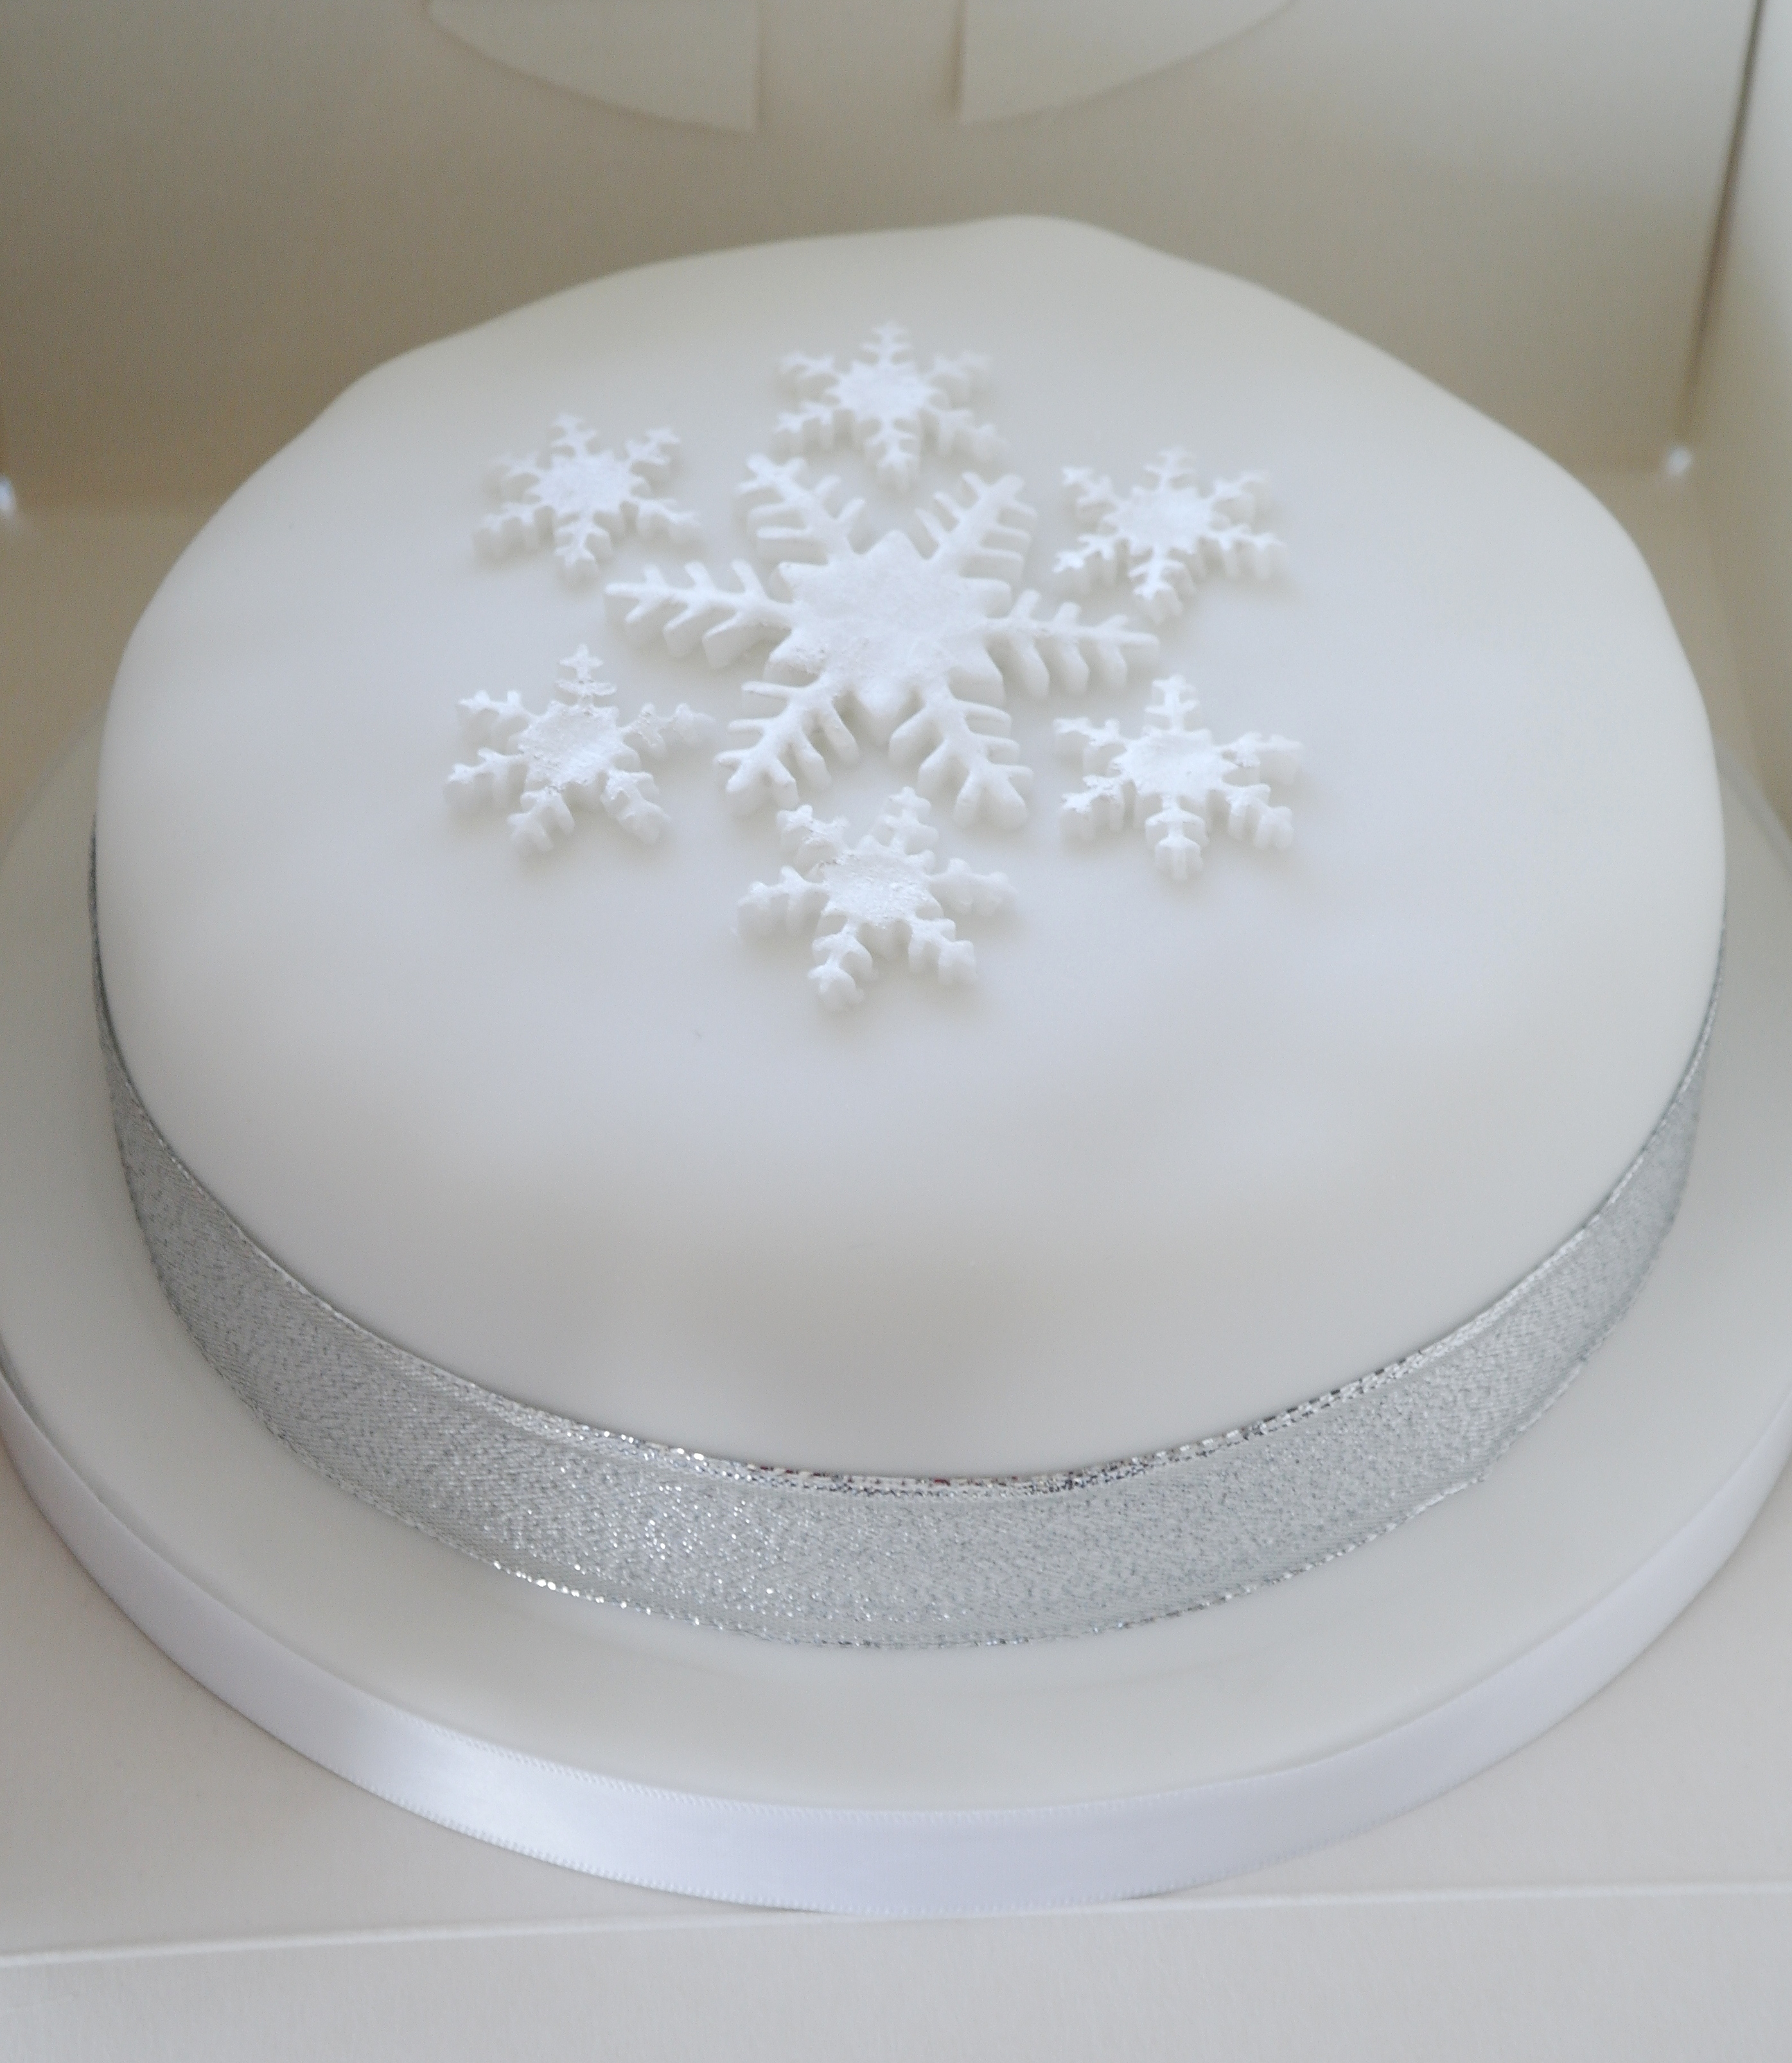 Snowflake Christmas Cake By There For The Baking Via Flickr Christmas Cake Decorations Christmas Cake Designs Christmas Cake